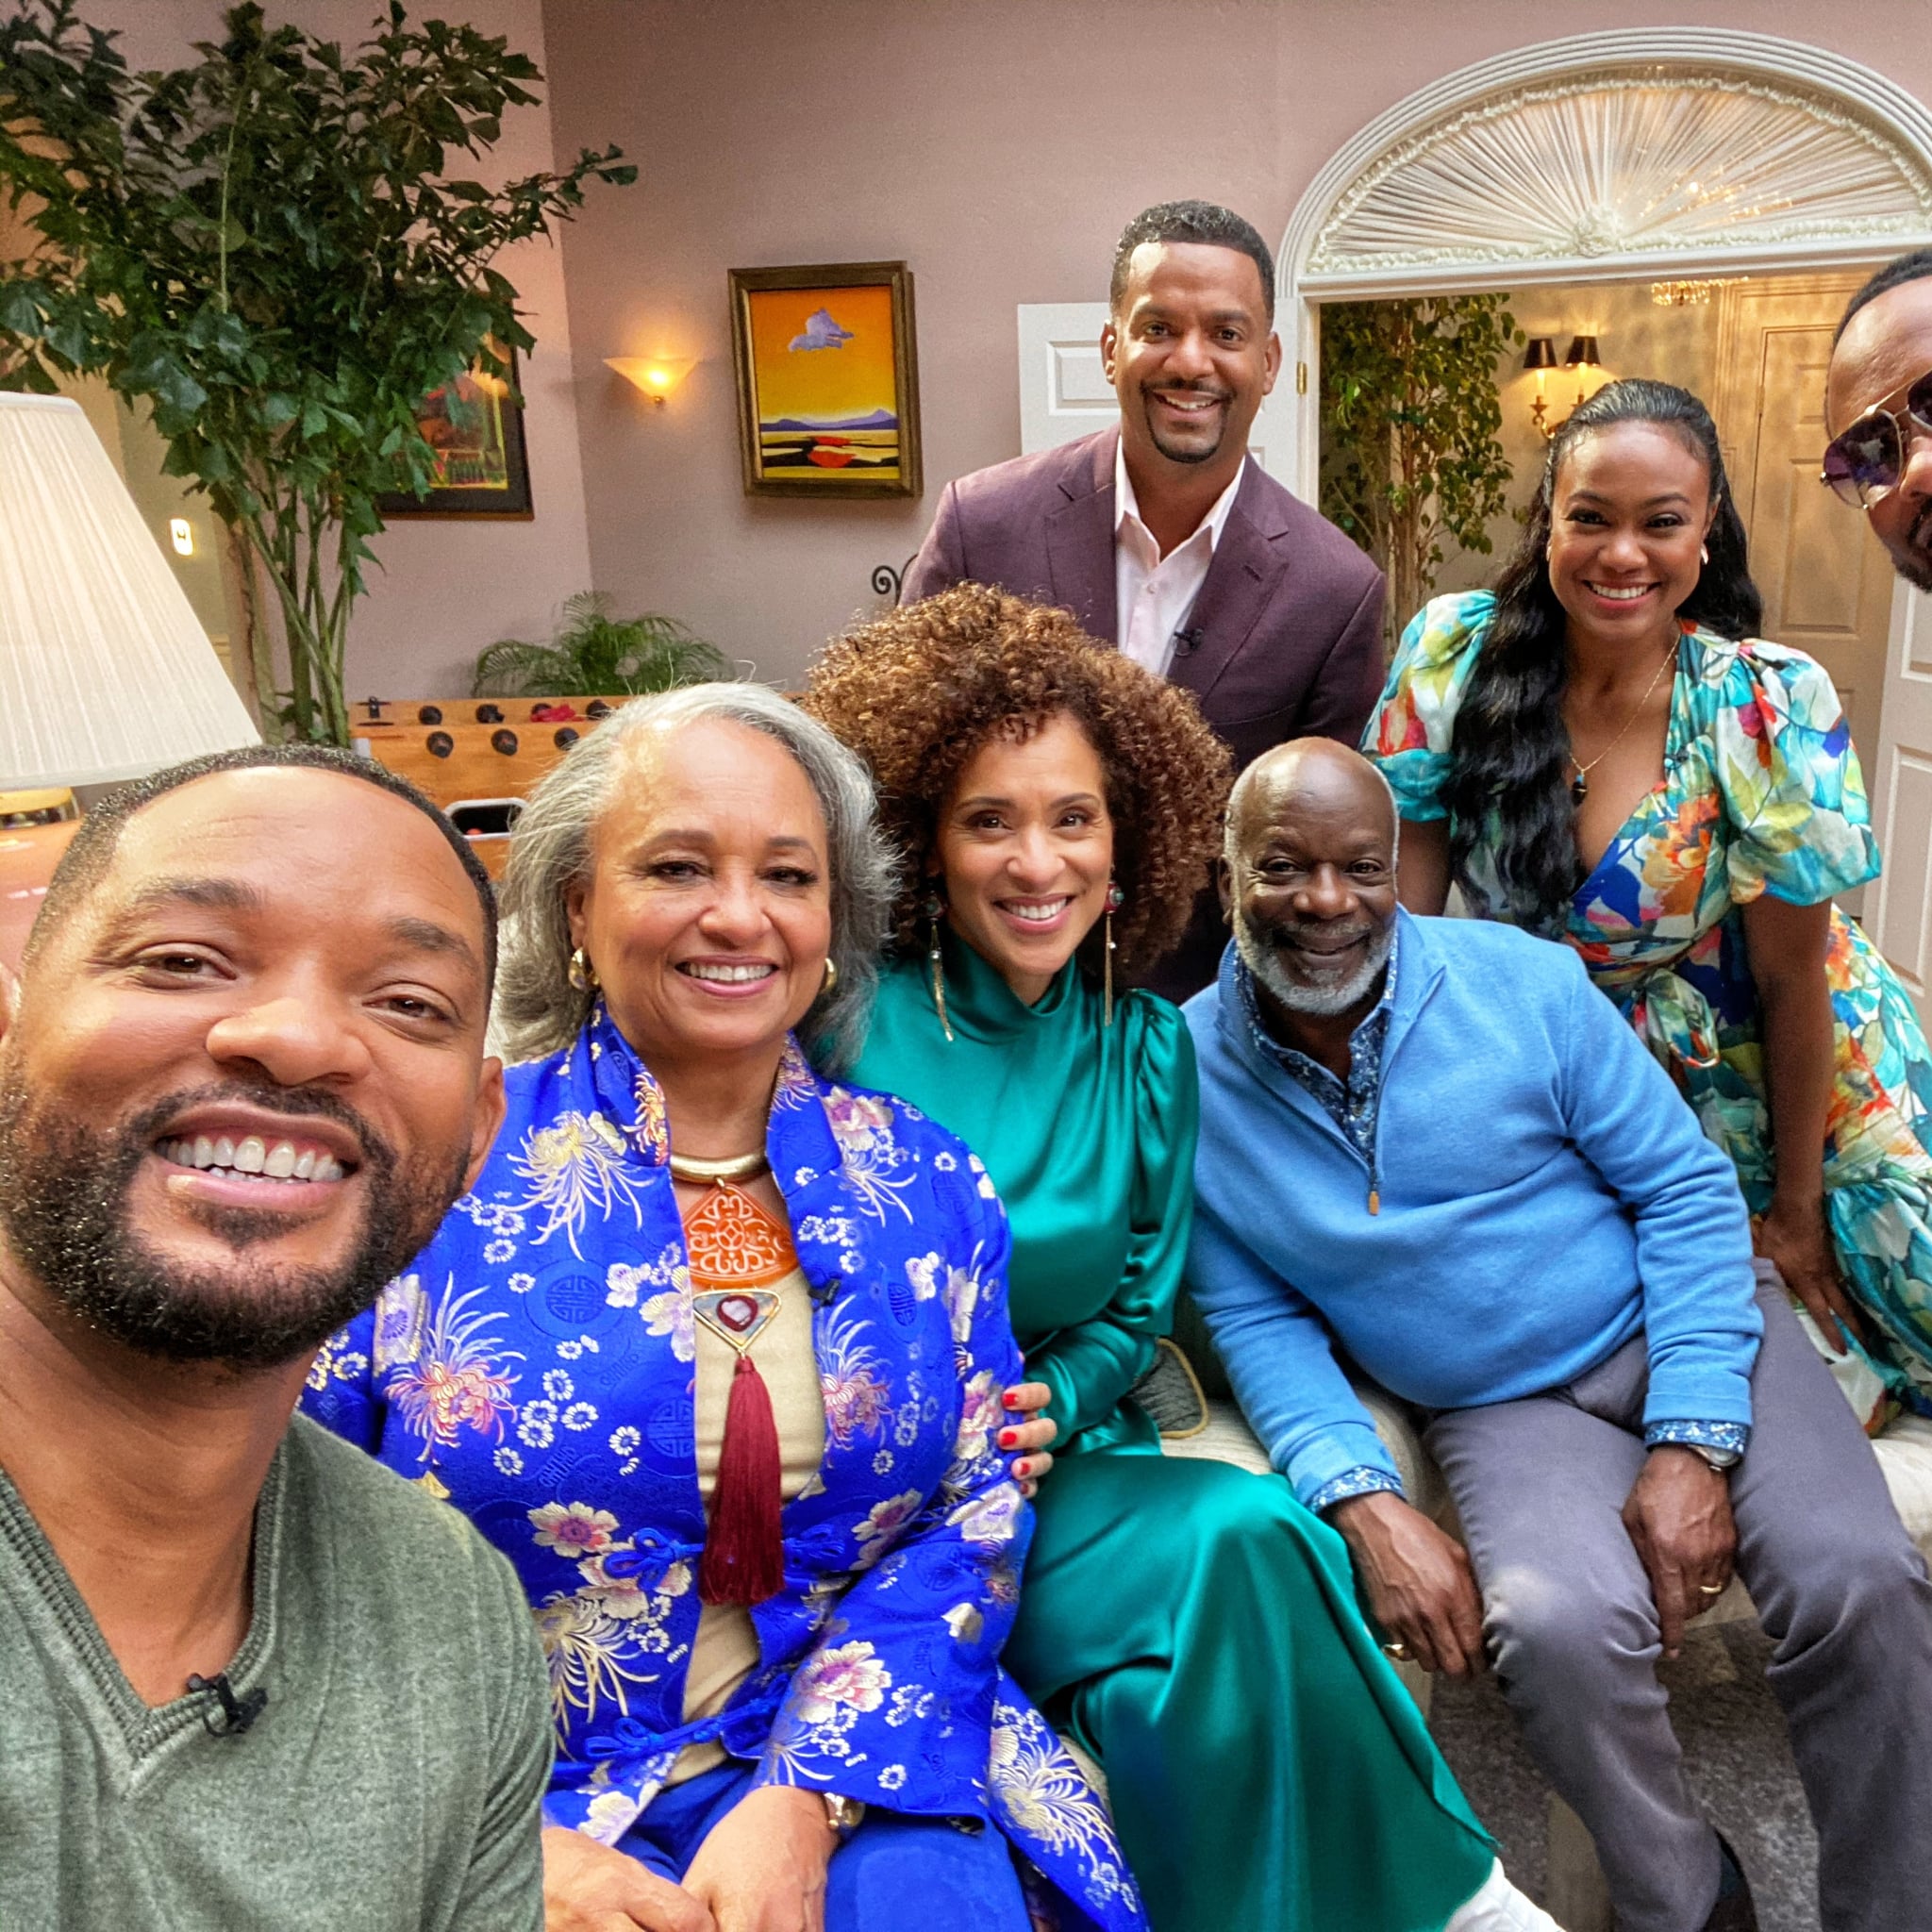 when is the fresh prince of bel air reunion